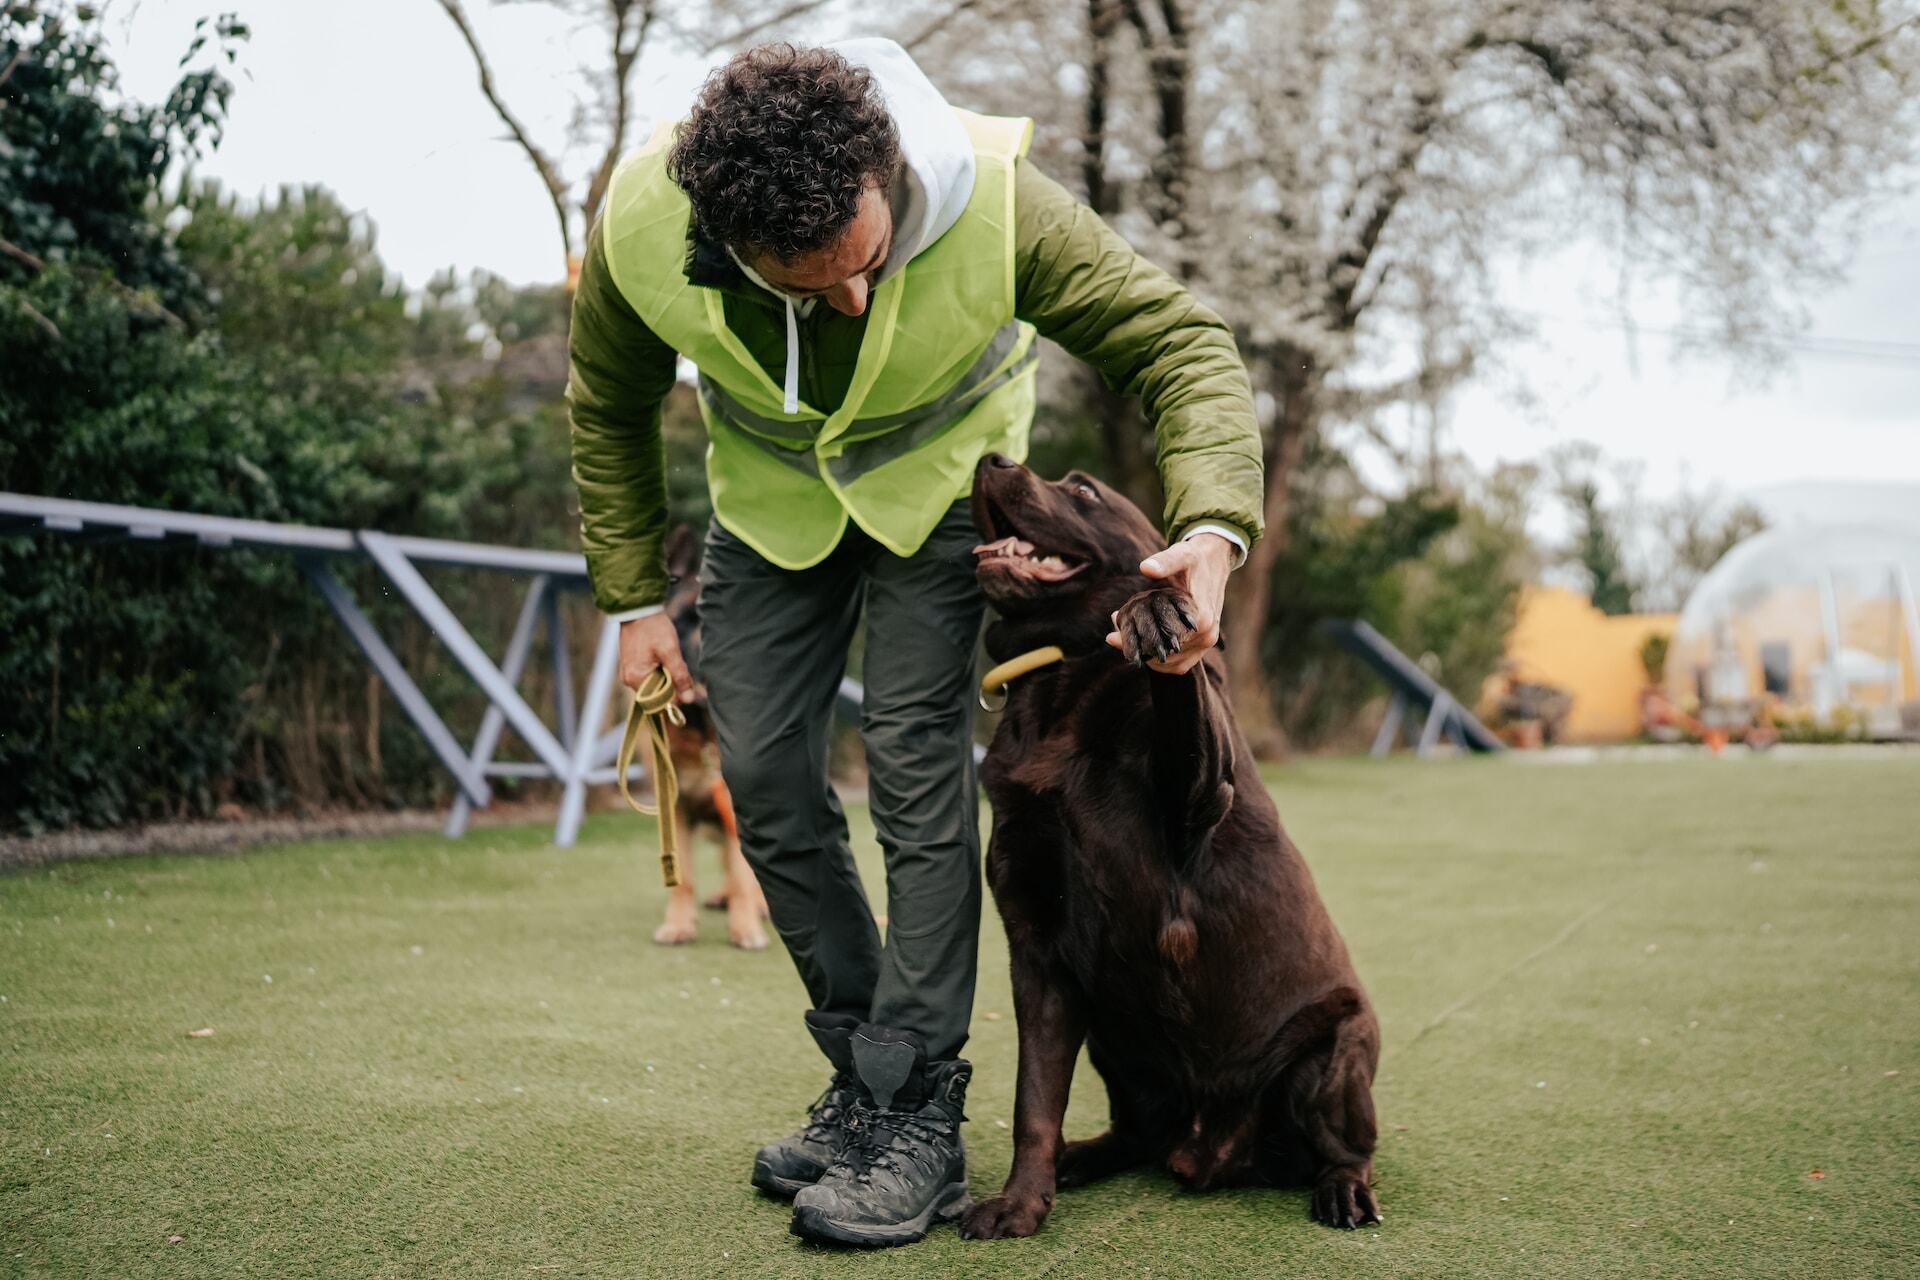 A man training his dog the Paw command in a garden